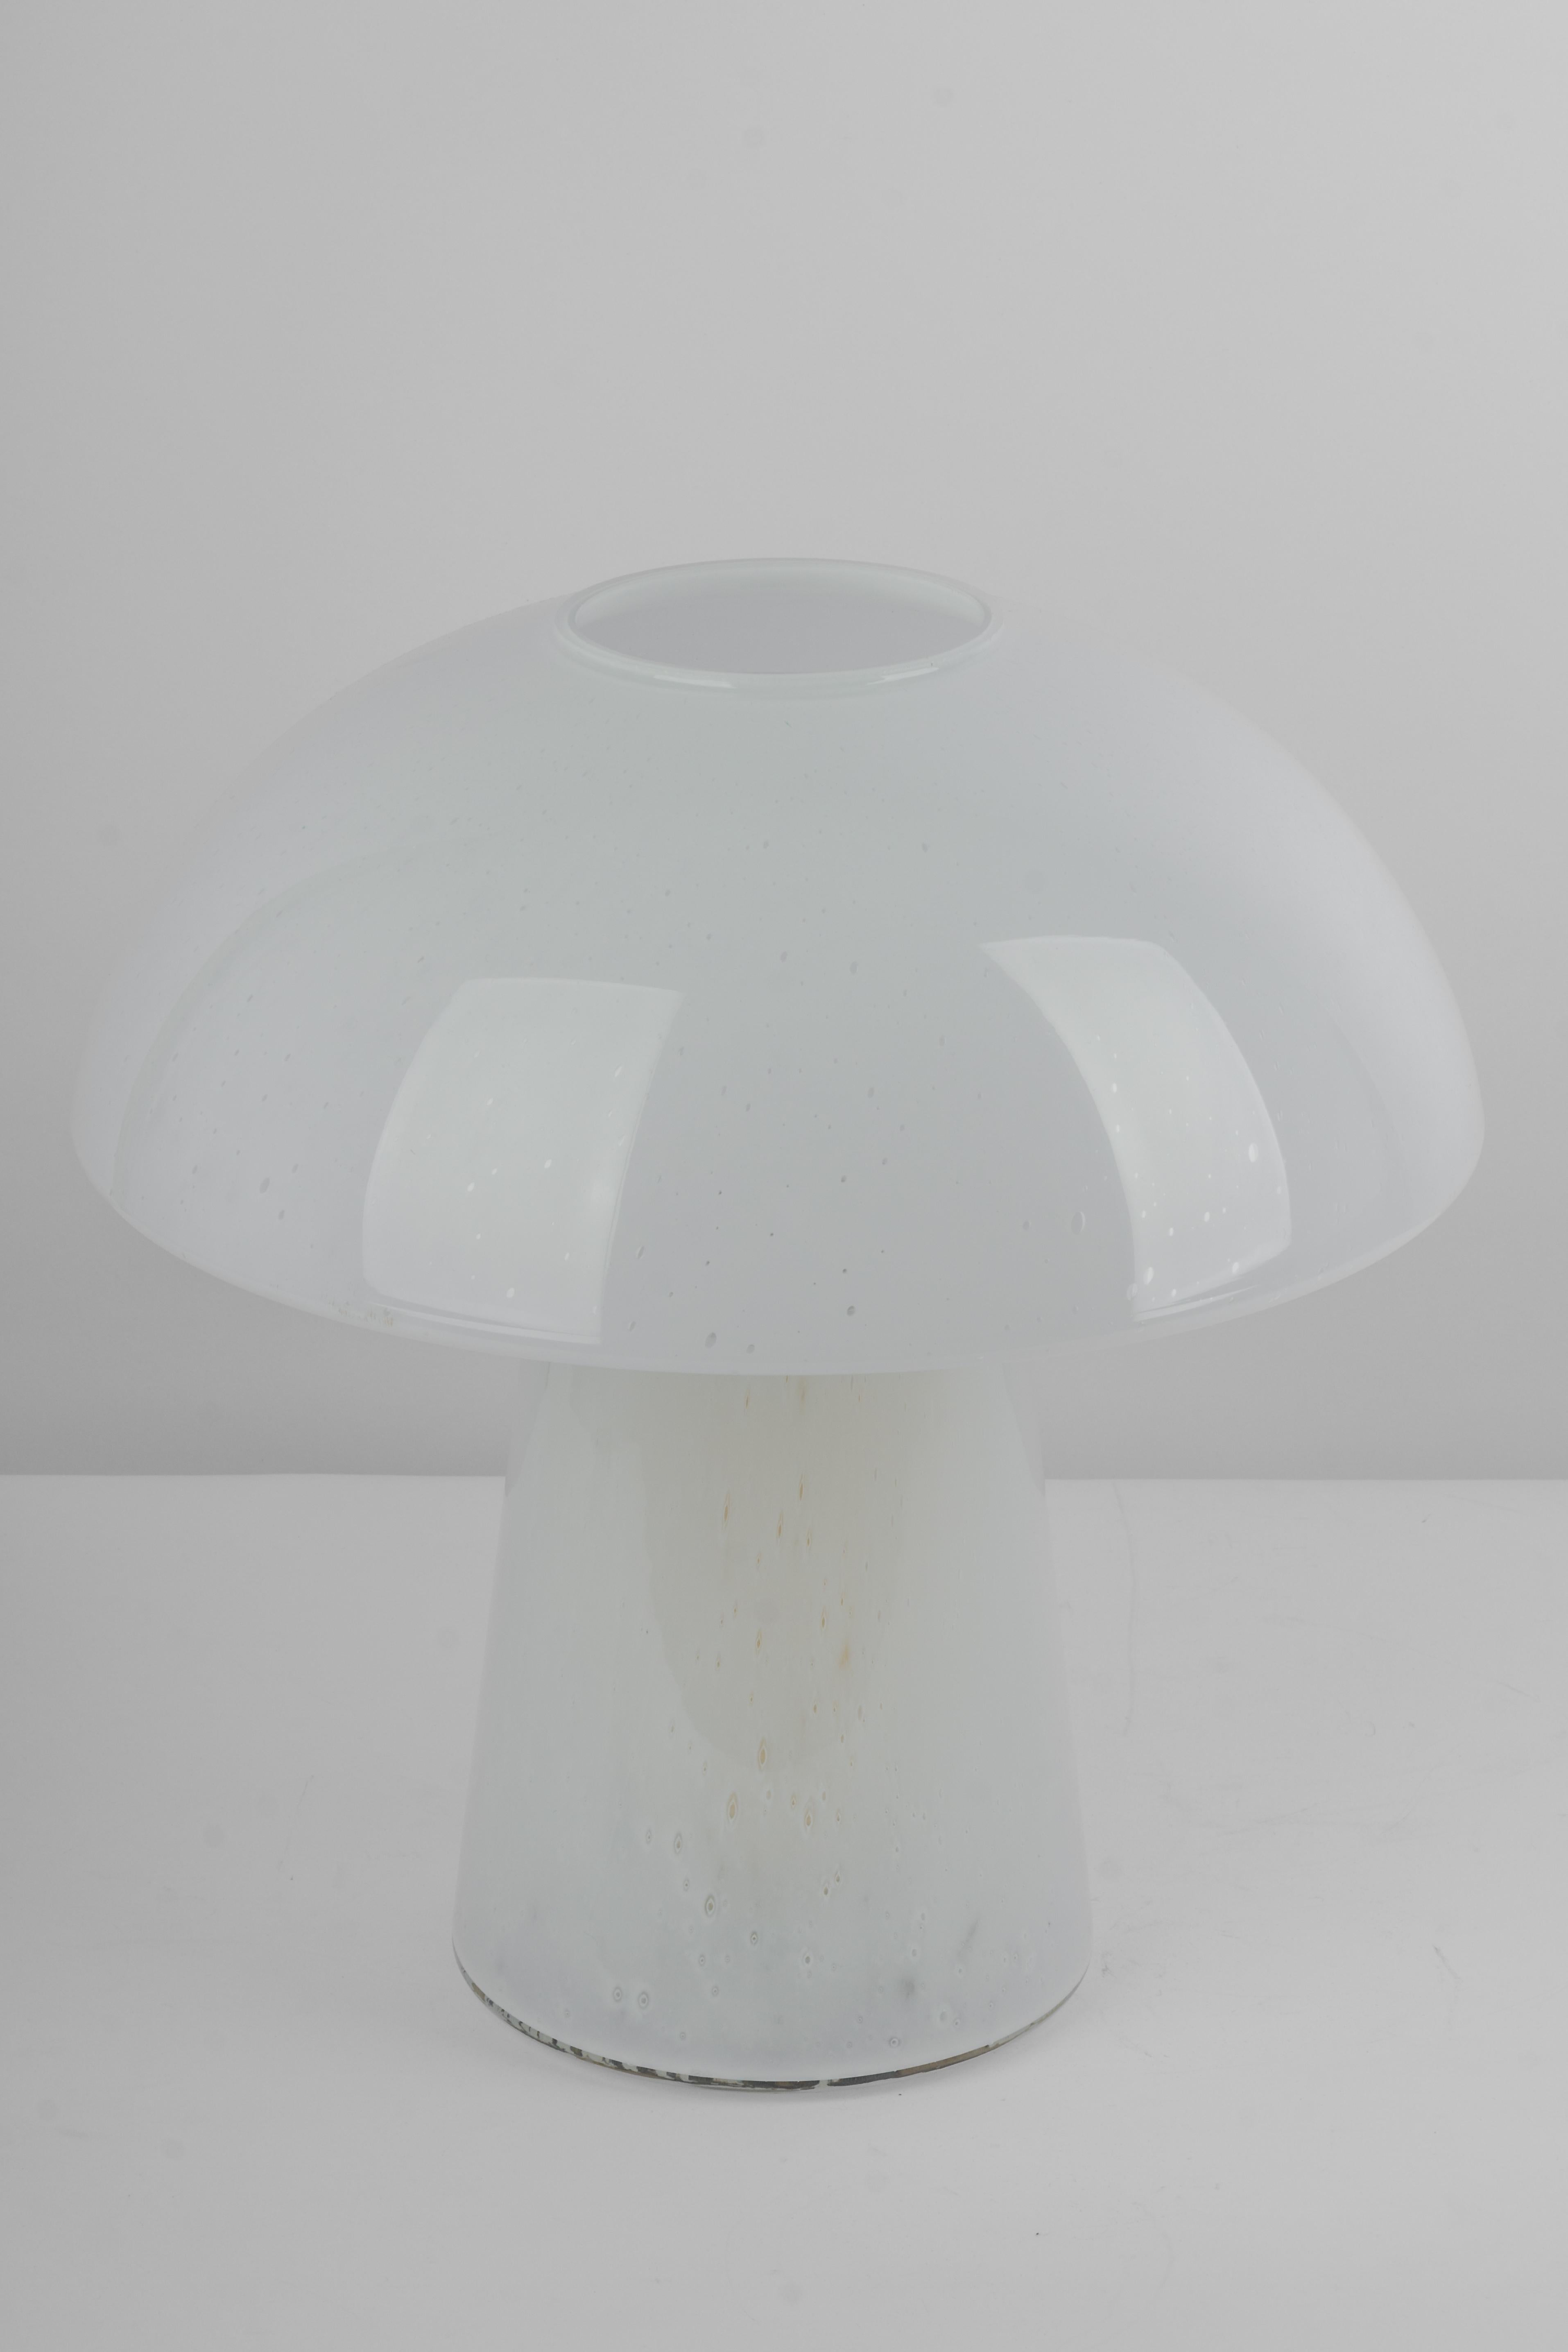 Wonderful mushroom table lamp by Limburg, Germany, 1970s. Made of a single piece.
Great glass body and its edgy quality contrast nicely with the smooth surface and shape of the mushroom. 

Measures: Large table lamp
Height 37 cm // 14.5 in.
Diameter